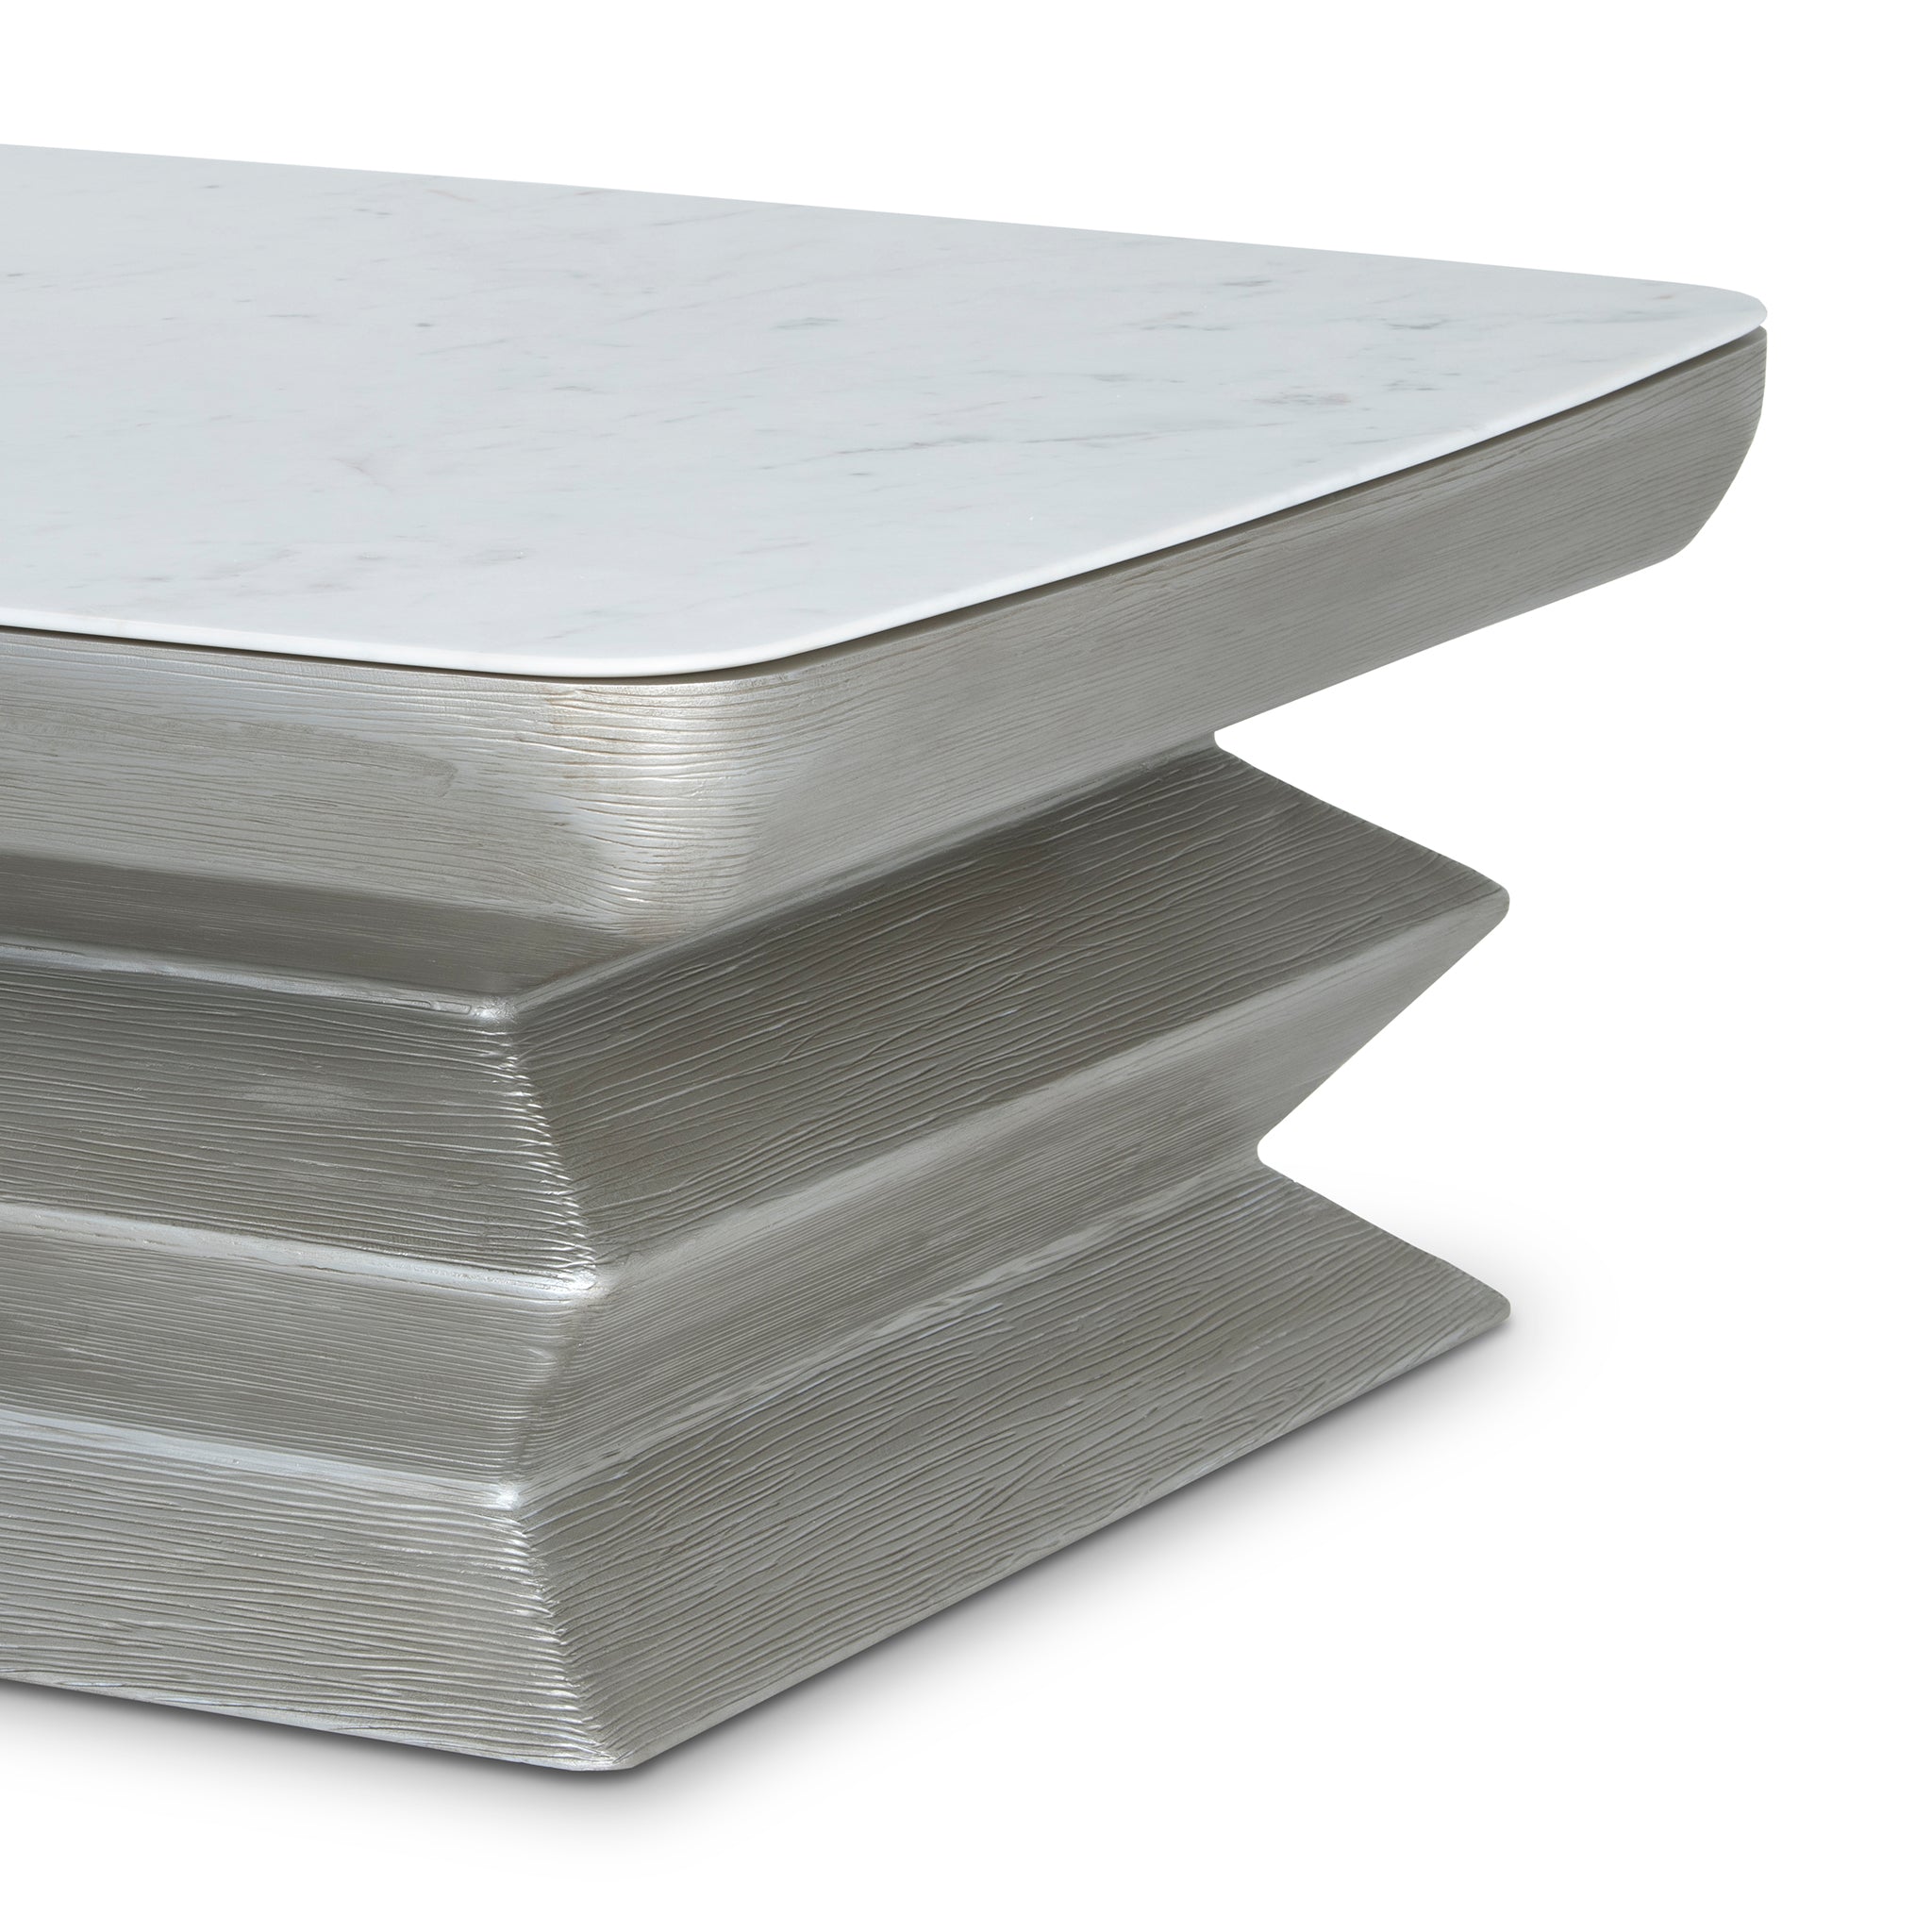 FLOW SILVER LOW COFFEE TABLE